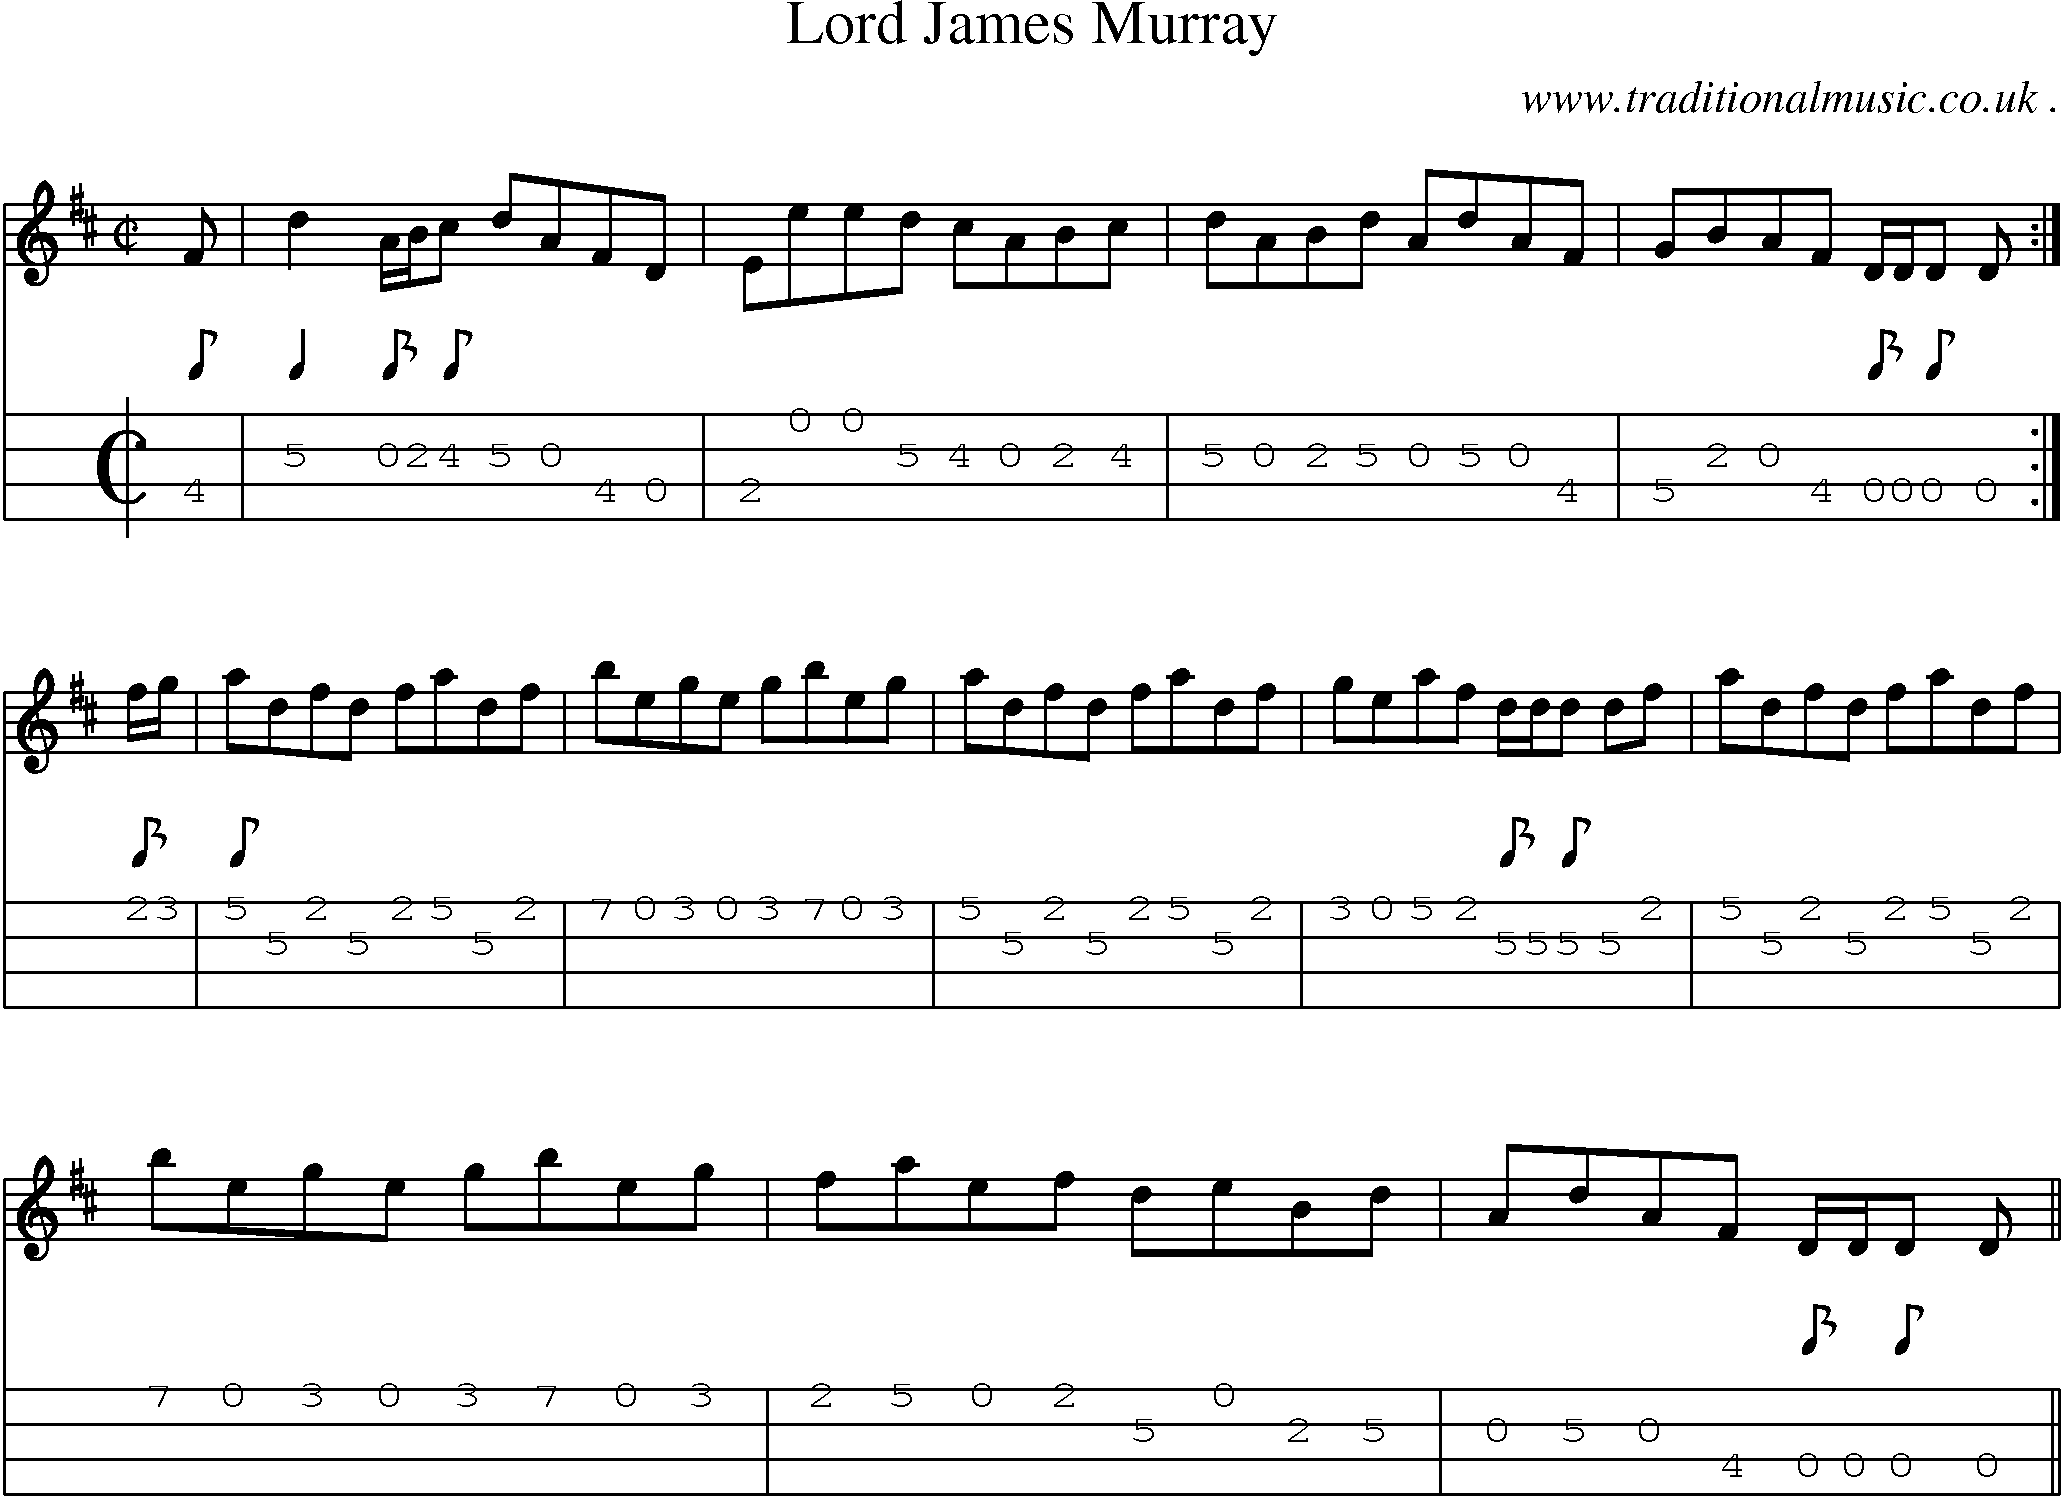 Sheet-music  score, Chords and Mandolin Tabs for Lord James Murray